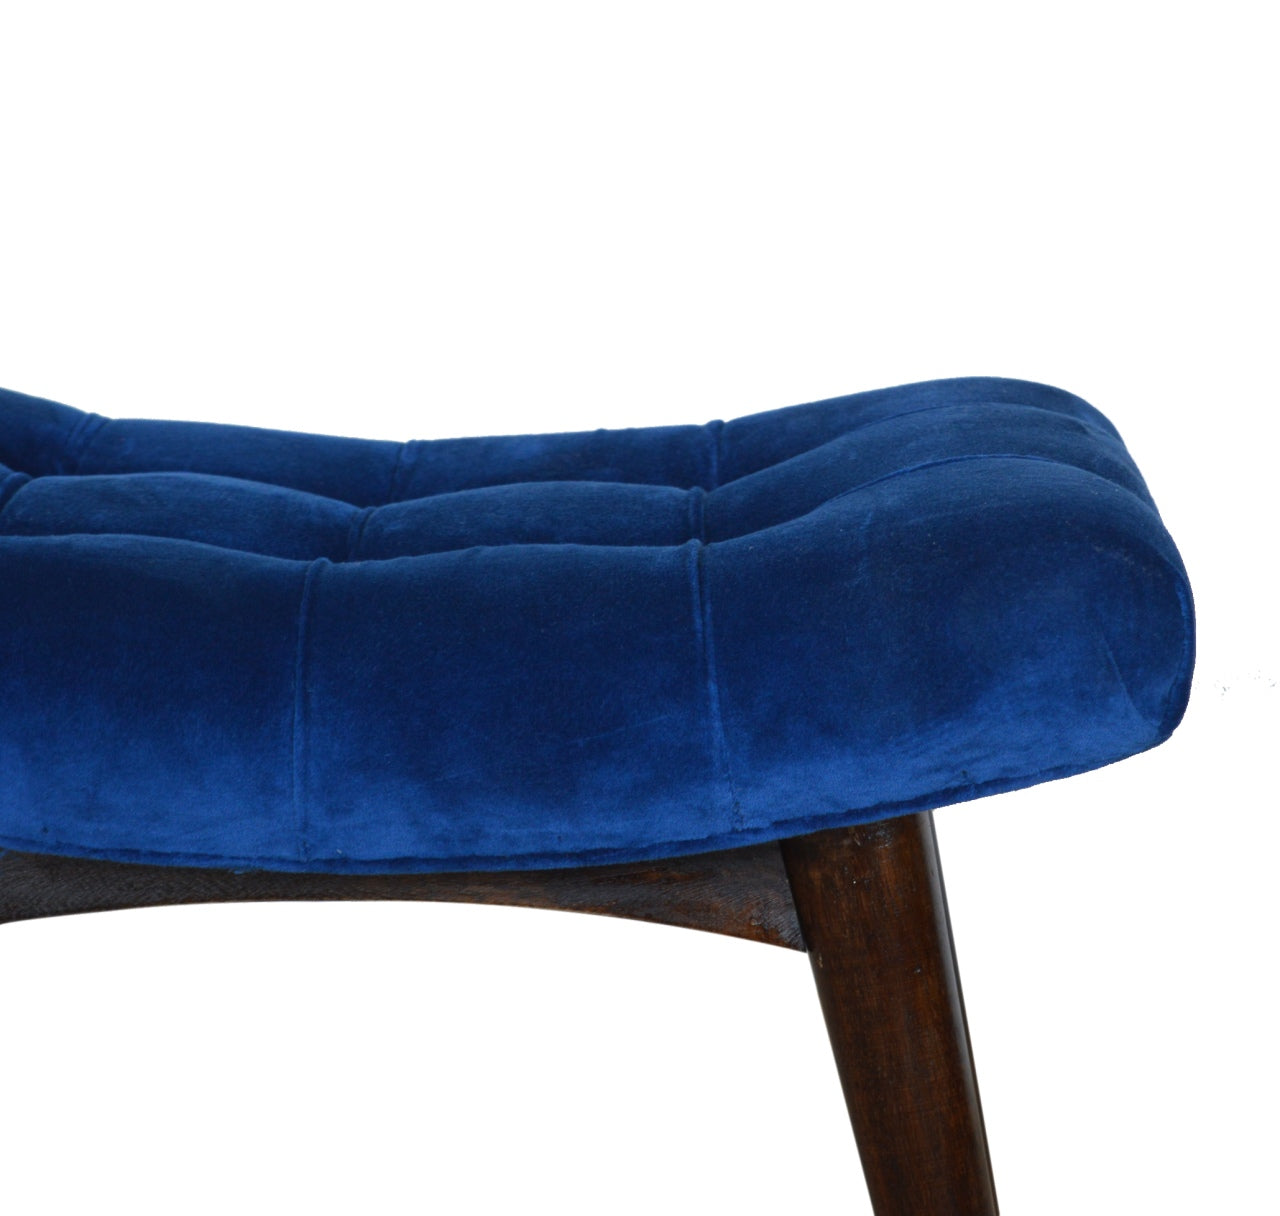 Solid Wood Royal Blue Cotton Velvet Deep Button Bench Stool Seat